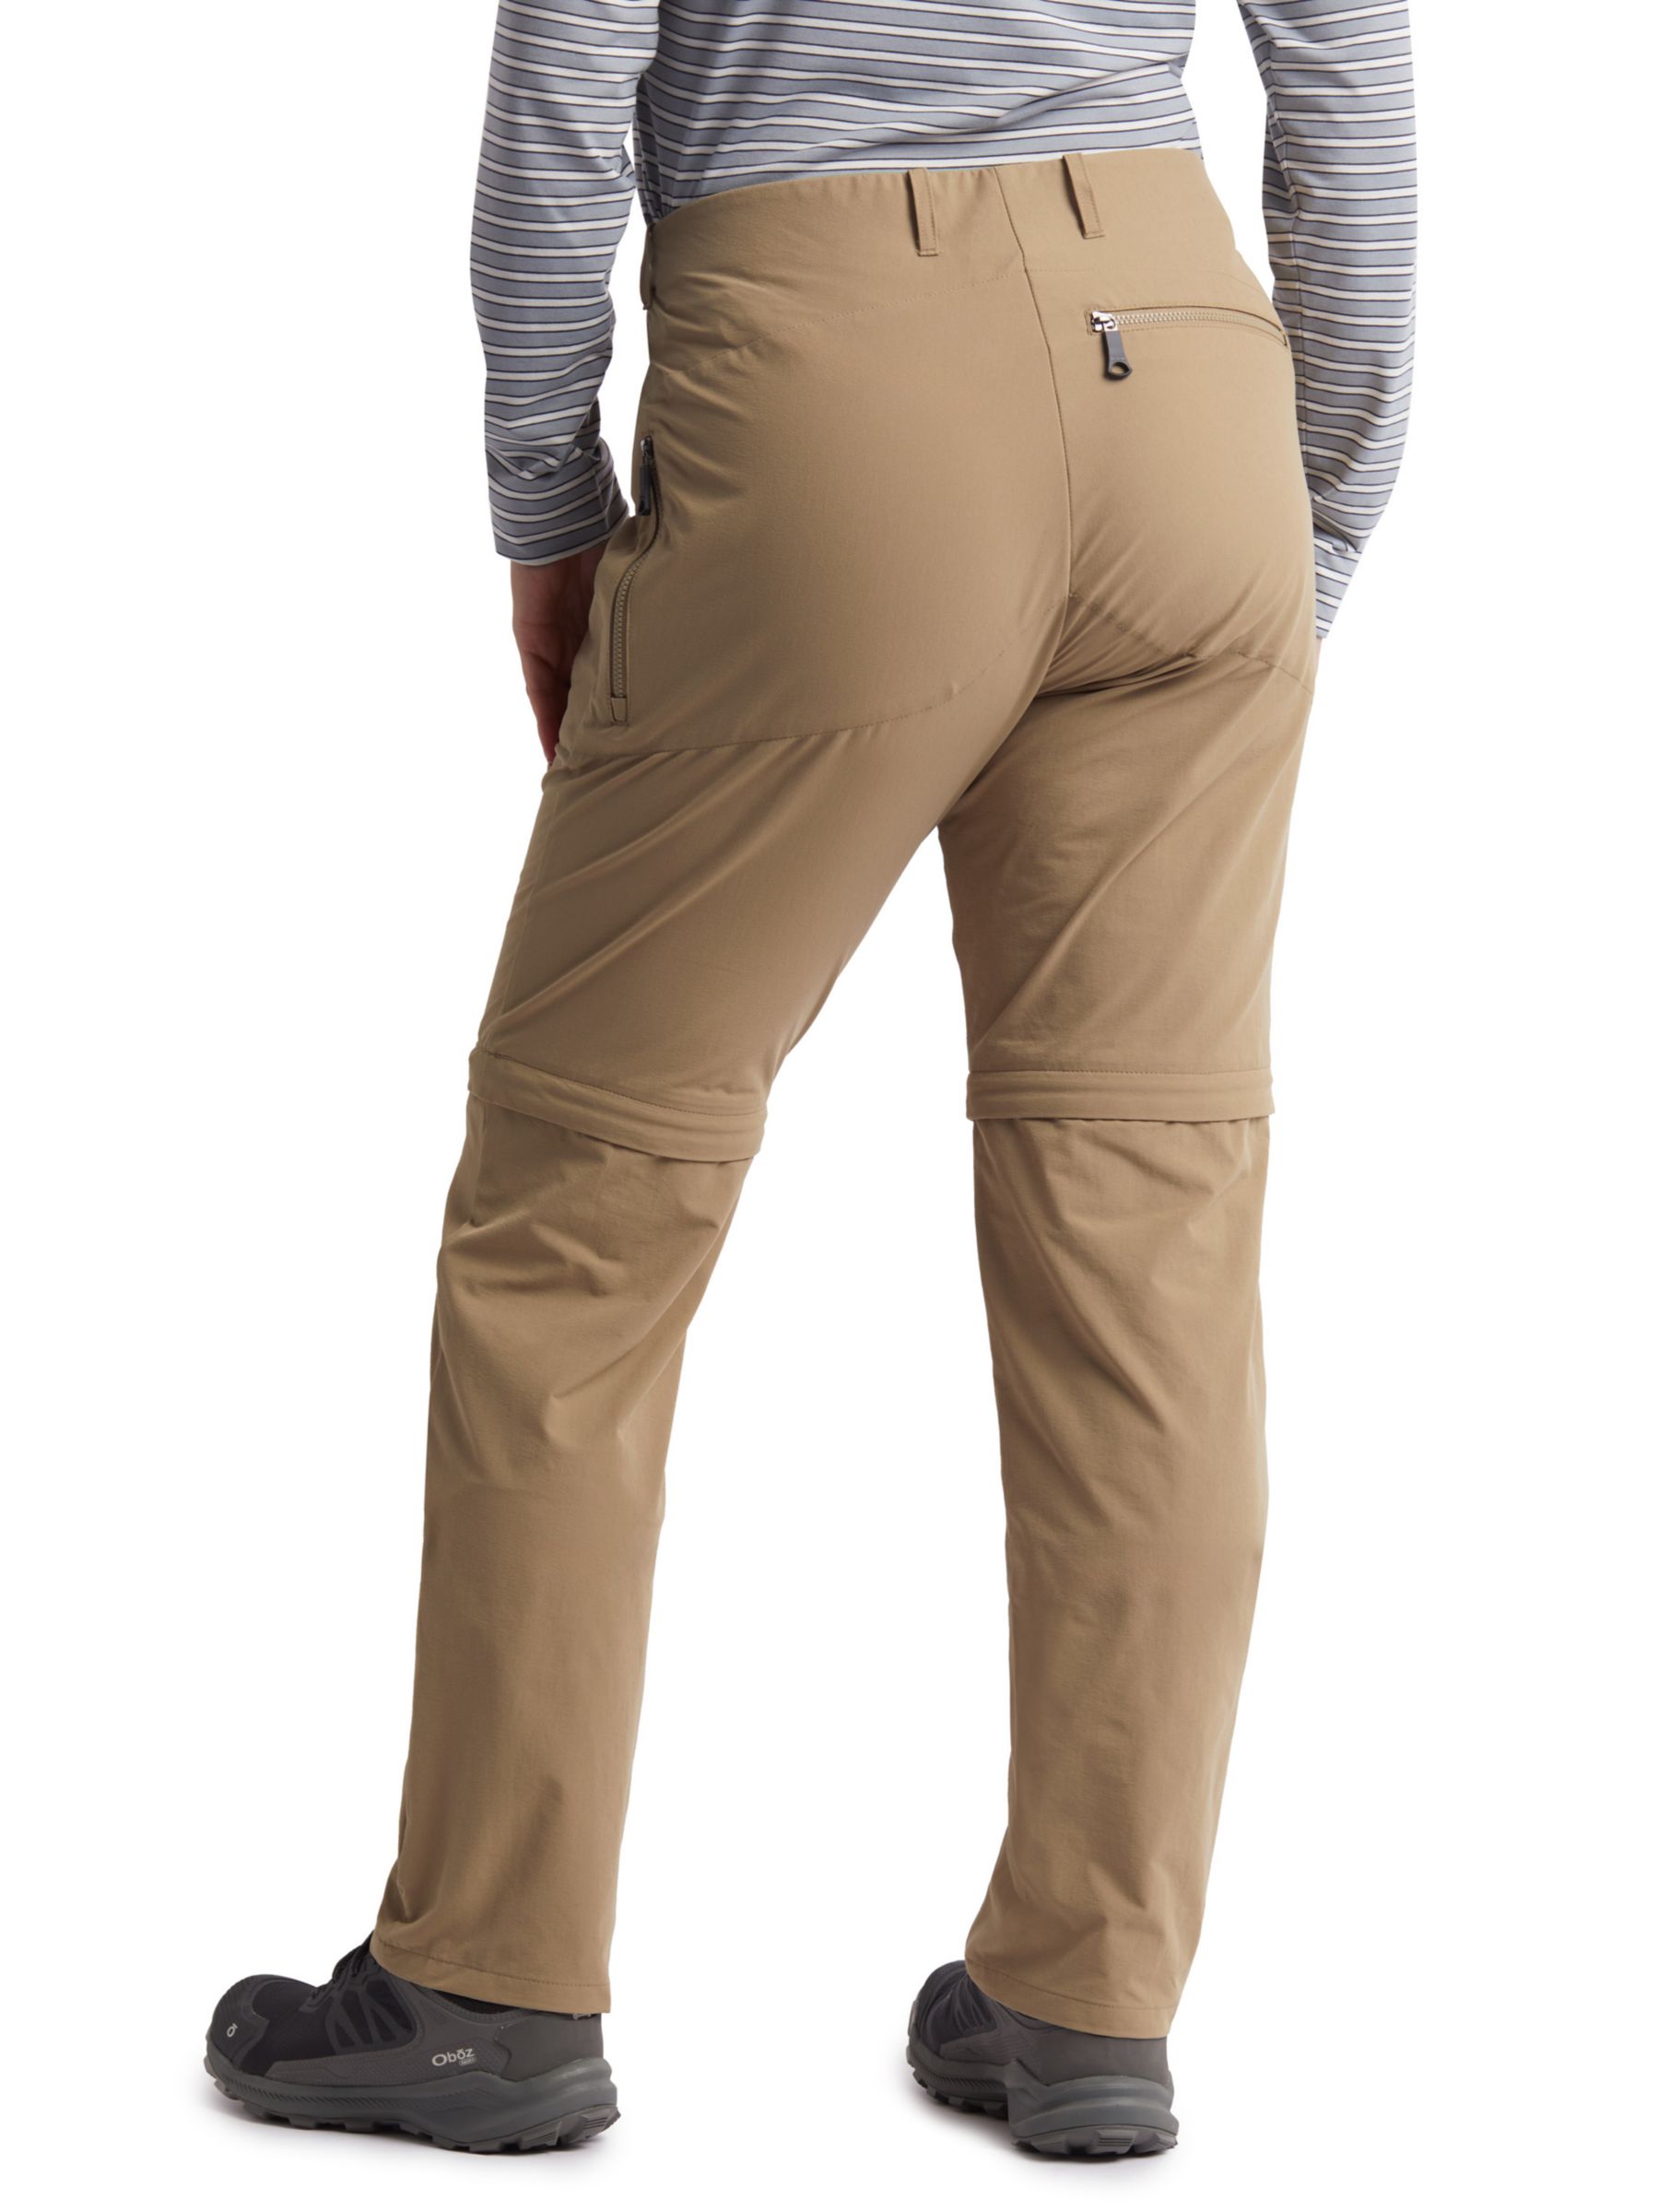 Buy Rohan Stretch Bags Walking Trousers Online at johnlewis.com